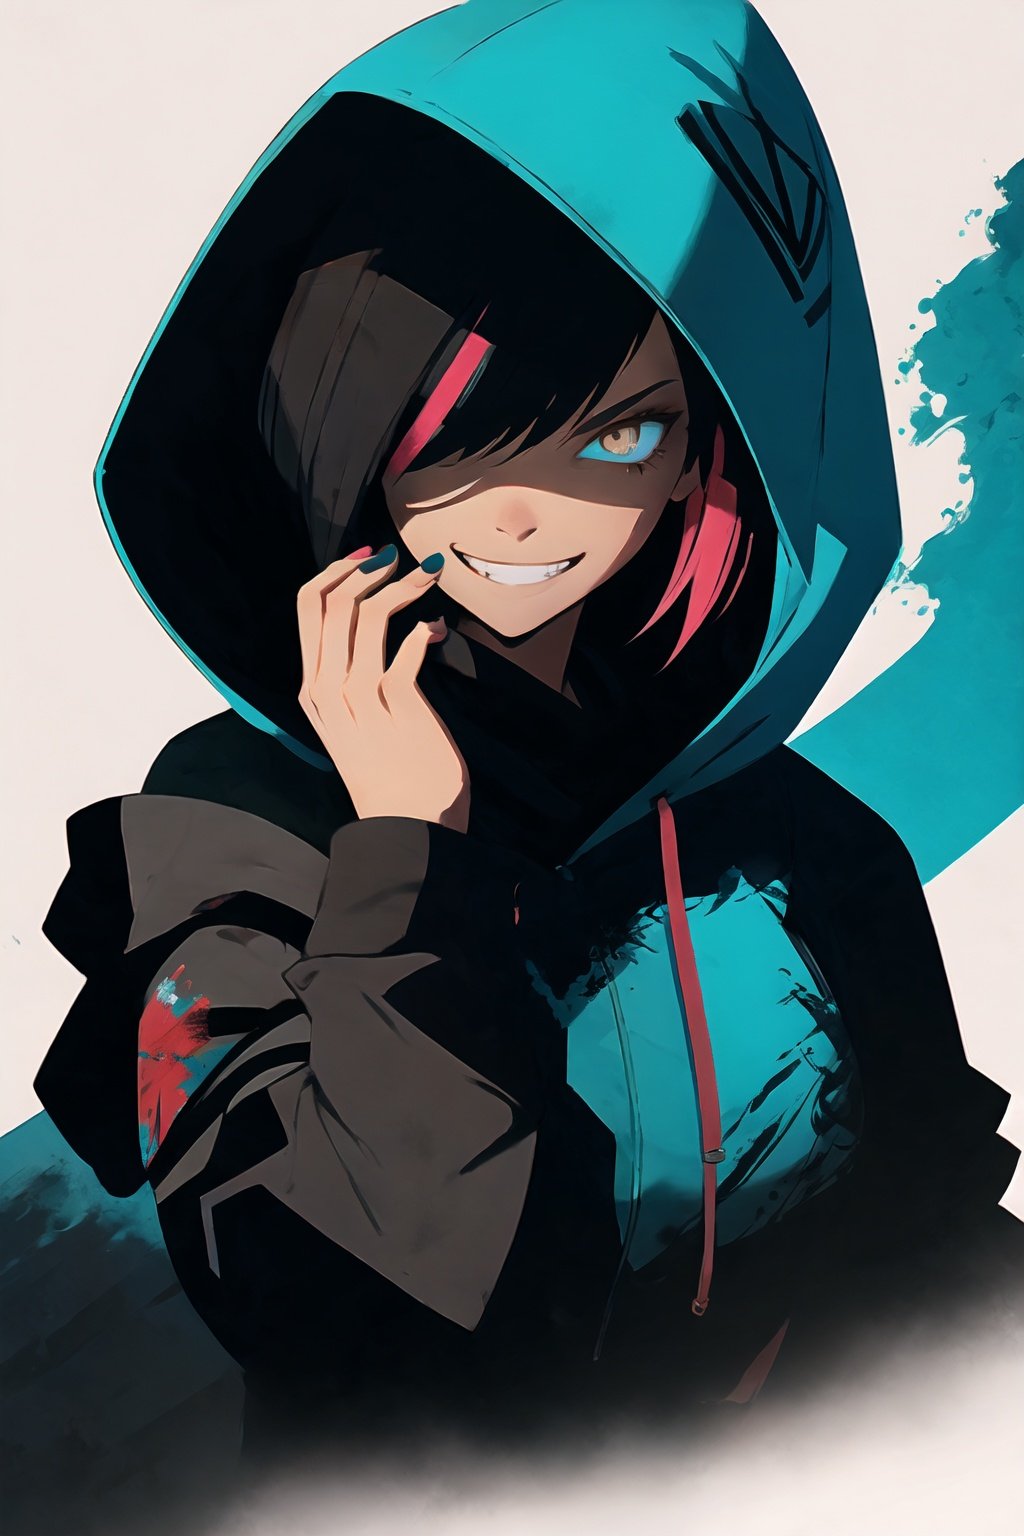 style of Simon Prades, girl, upper body, asymmetrical bob, hoody on, painted nails, smug grin, minimalistic, Illustration, Character Design, Ink, thematic background, ambient enviroment, epic